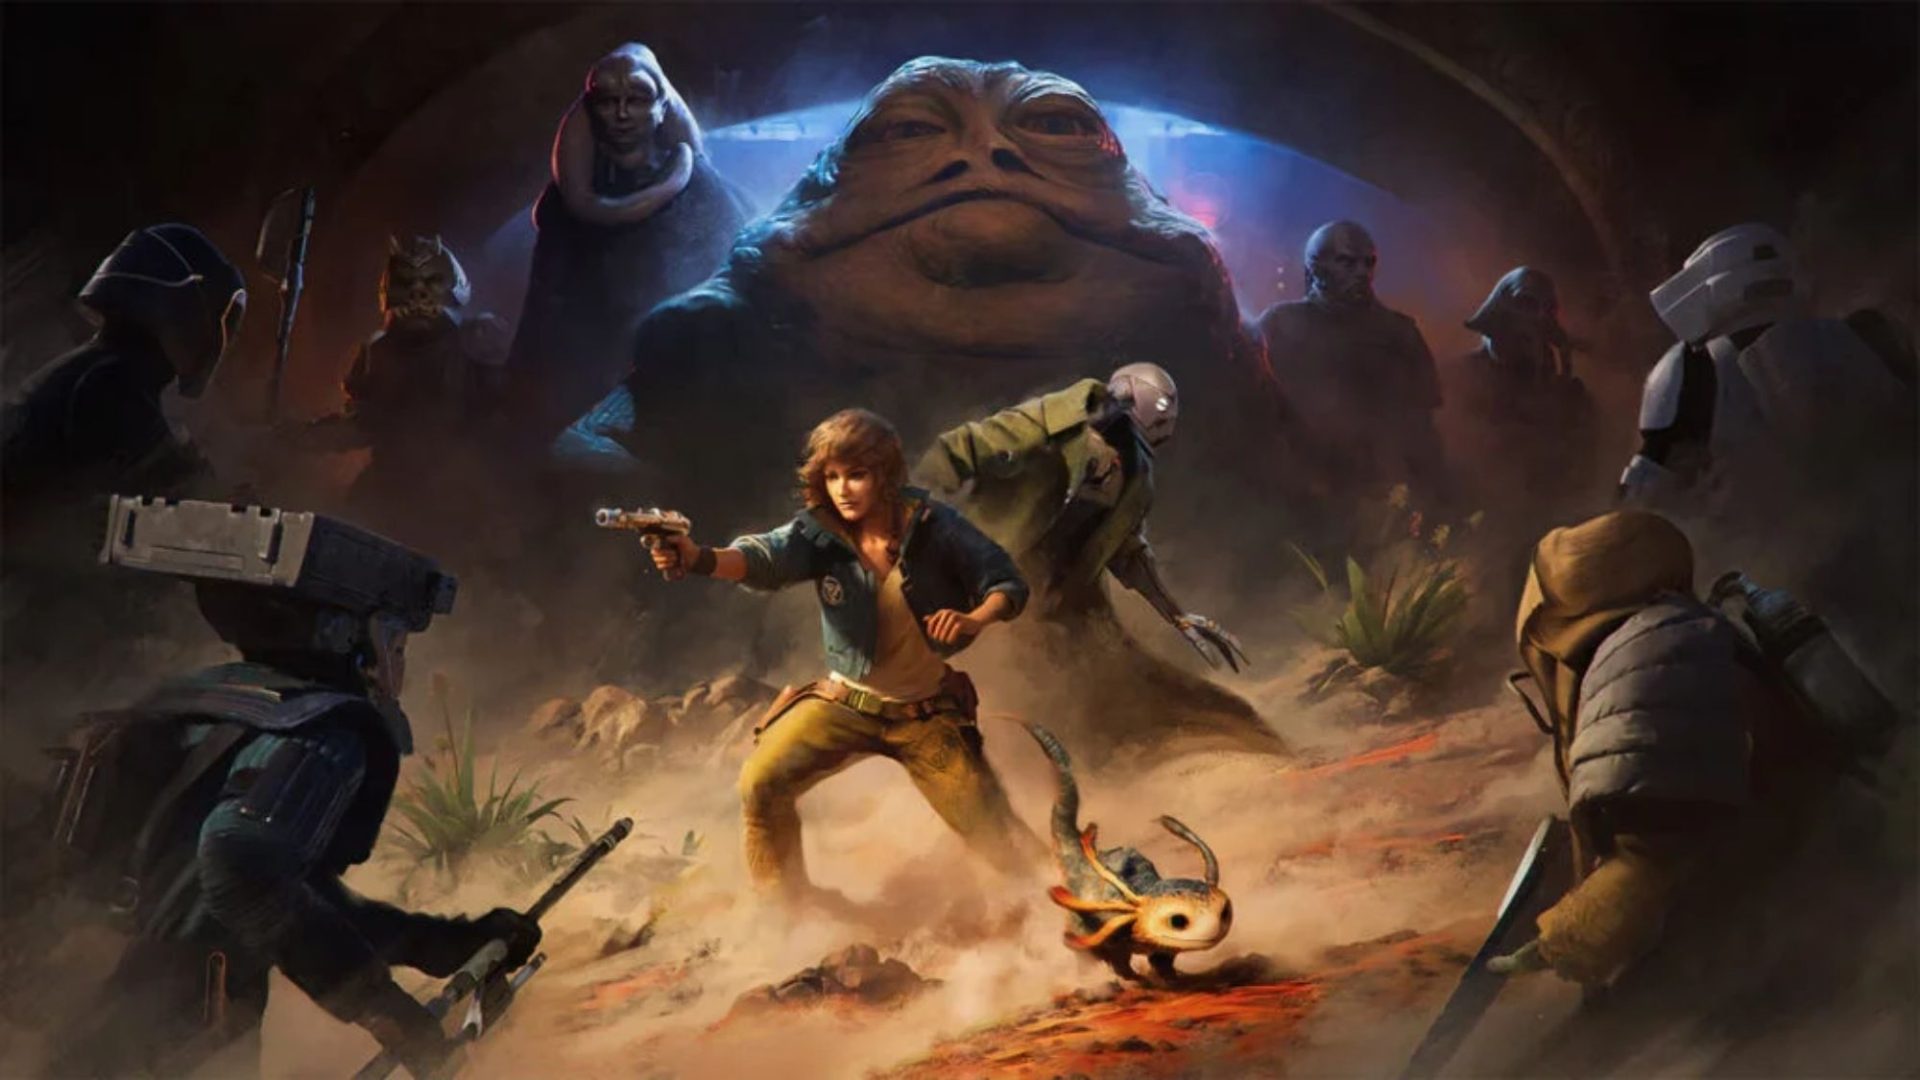 It will cost you $110 in total to access Star Wars Outlaws and its exclusive Jabba the Hutt mission.